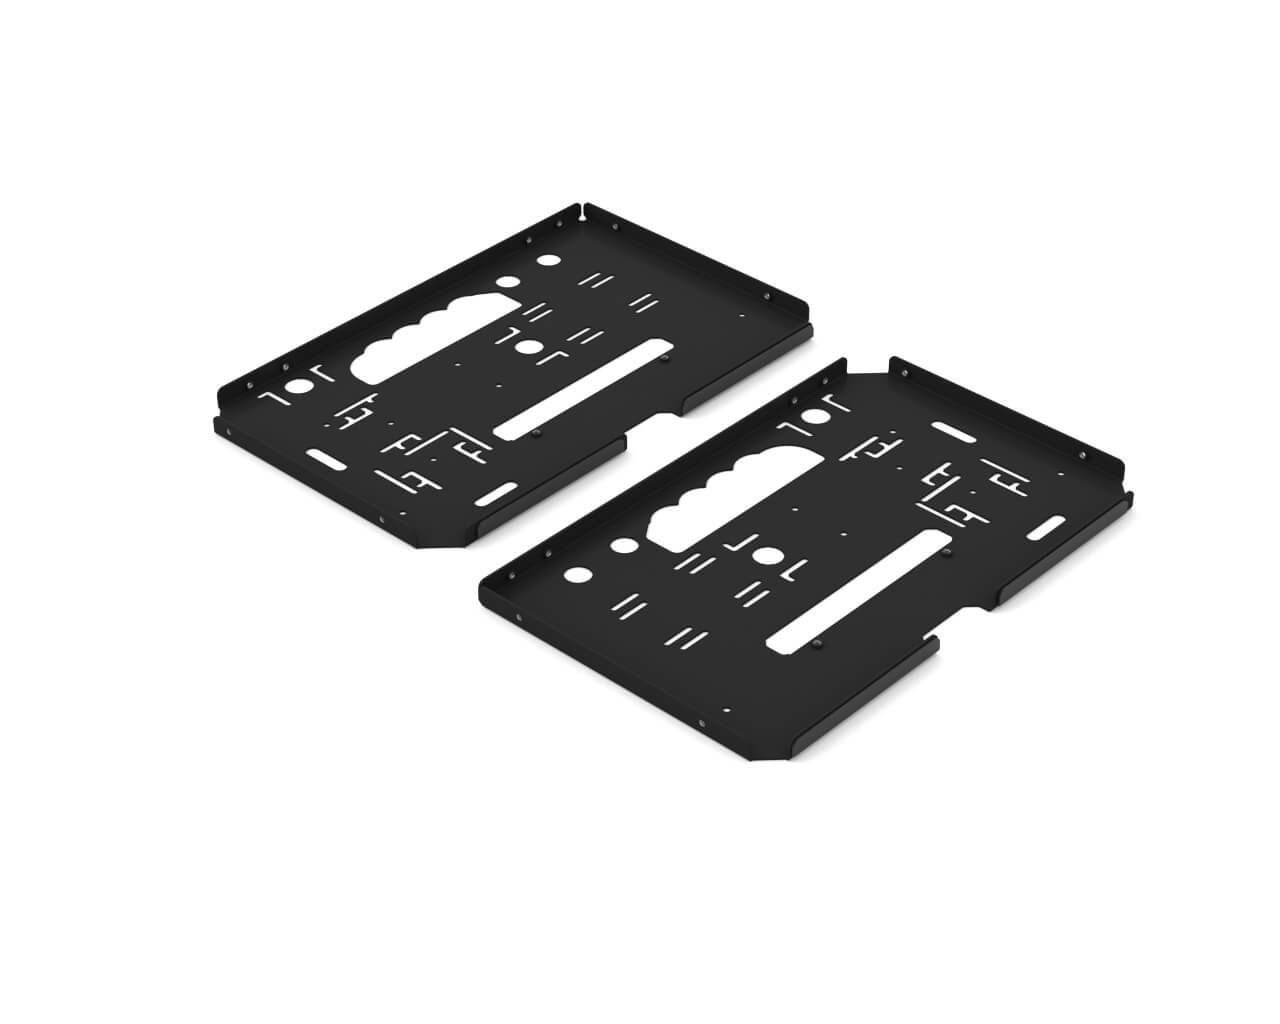 Praxis WetBenchSX Flat Edition Leg Replacements - PrimoChill - KEEPING IT COOL Black